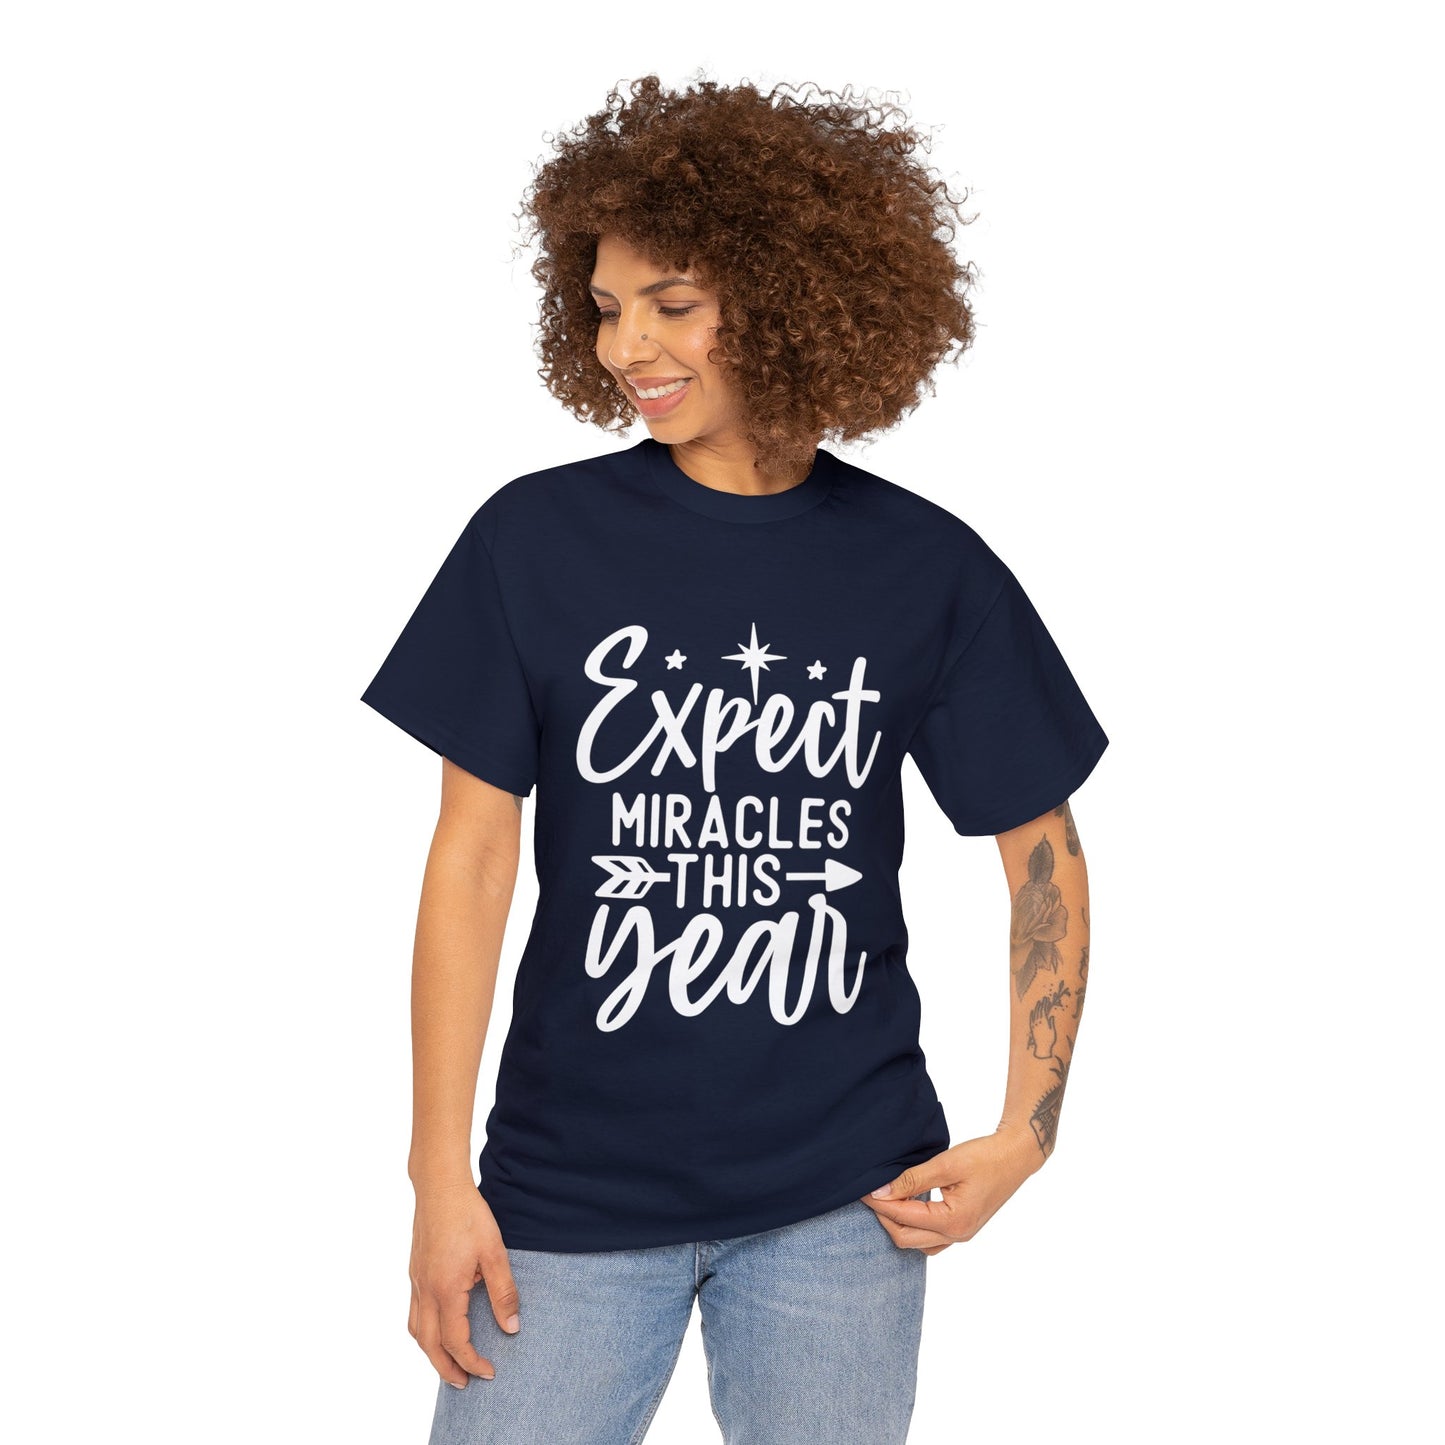 Expect Miracles Unisex Heavy Cotton Tee